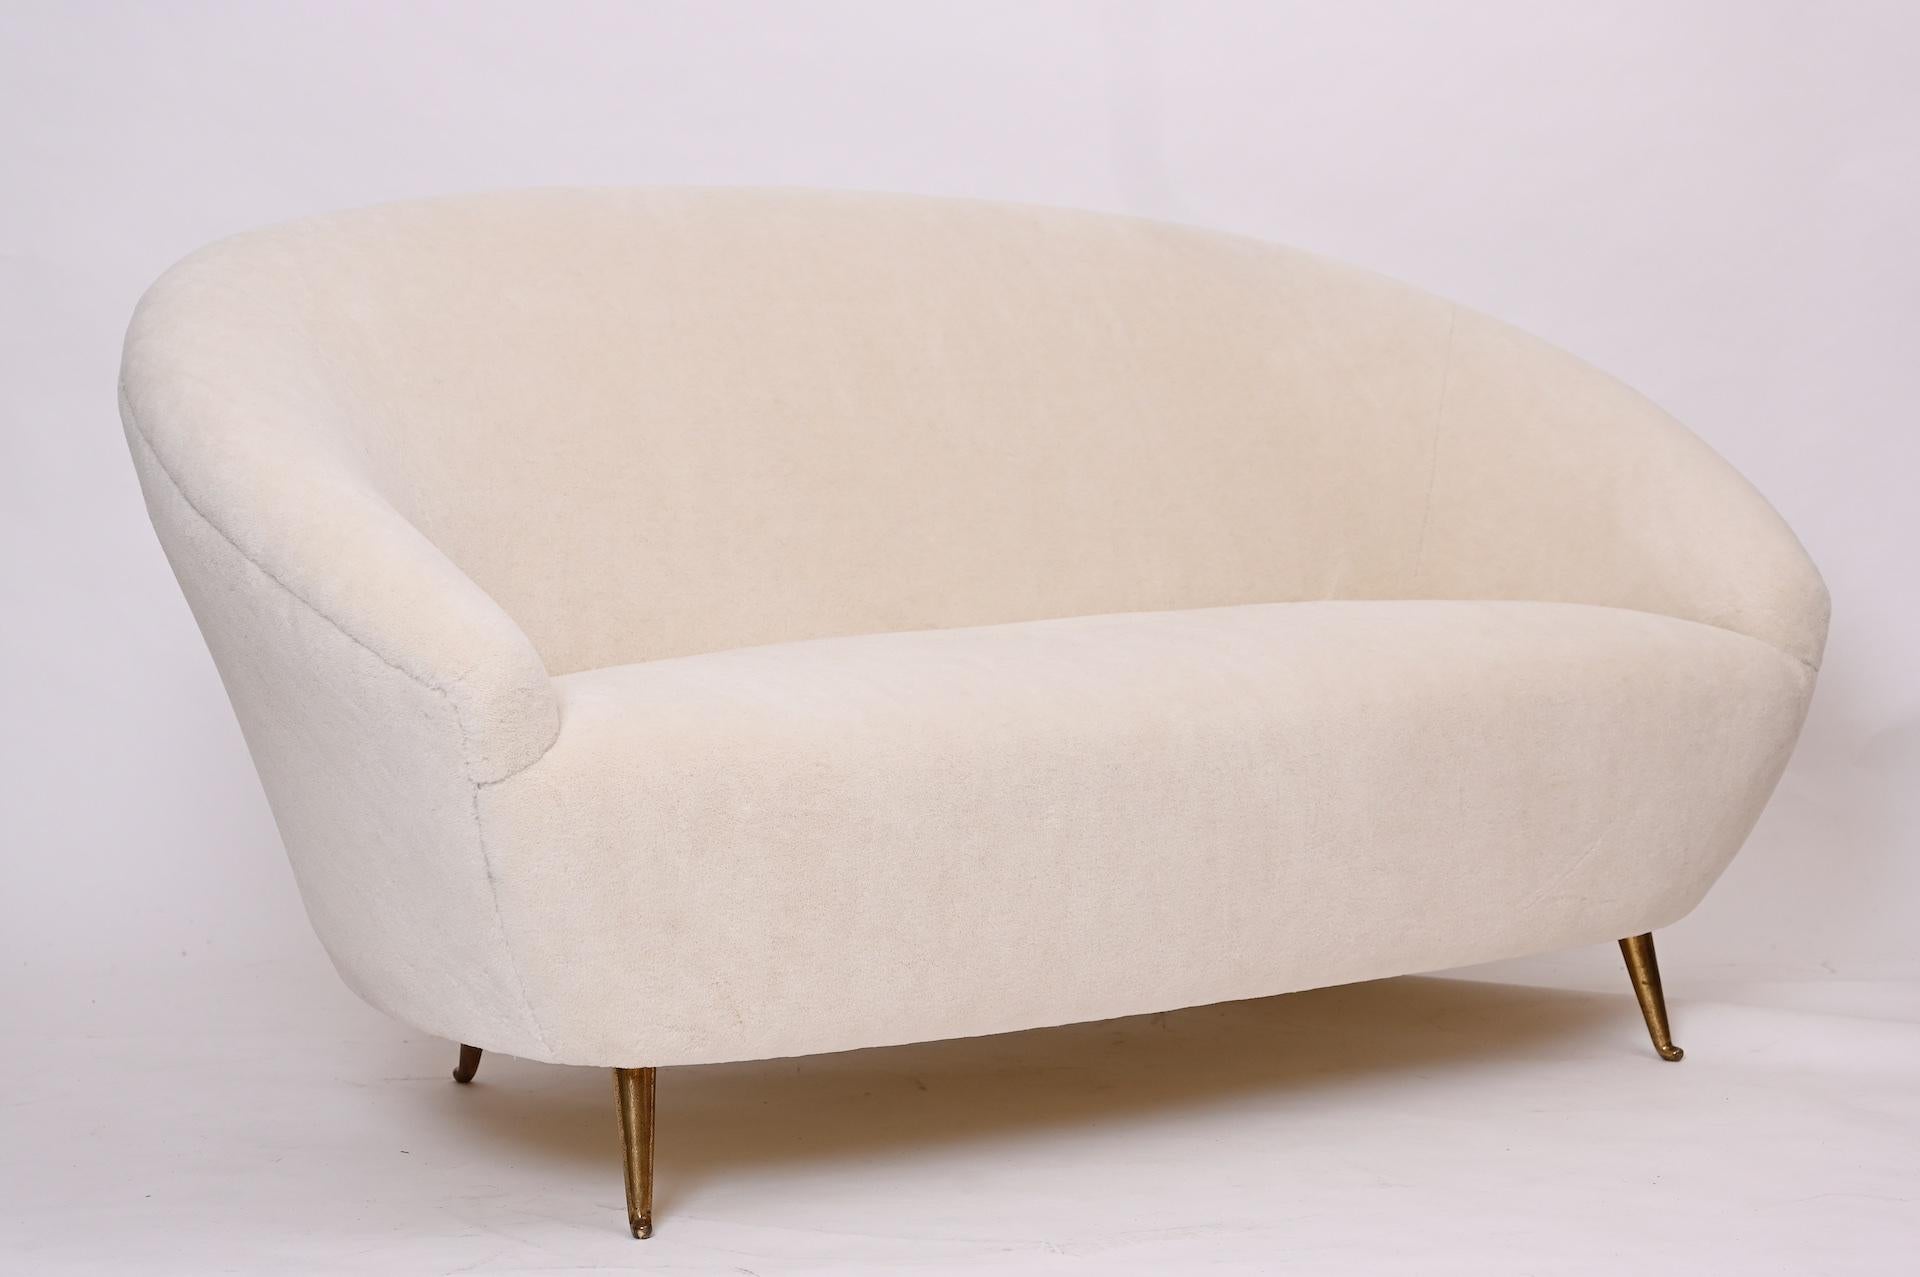 Elegant original 1950s curved sofa by Isa Bergamo from 1950s, Italy.
Style of Ico Parisi or Munari

 Reupholstered in an off-white/cream alpaca wool velvet... so soft to touch!

Lovely proportions. And very comfortable!

Pair of near matching chairs